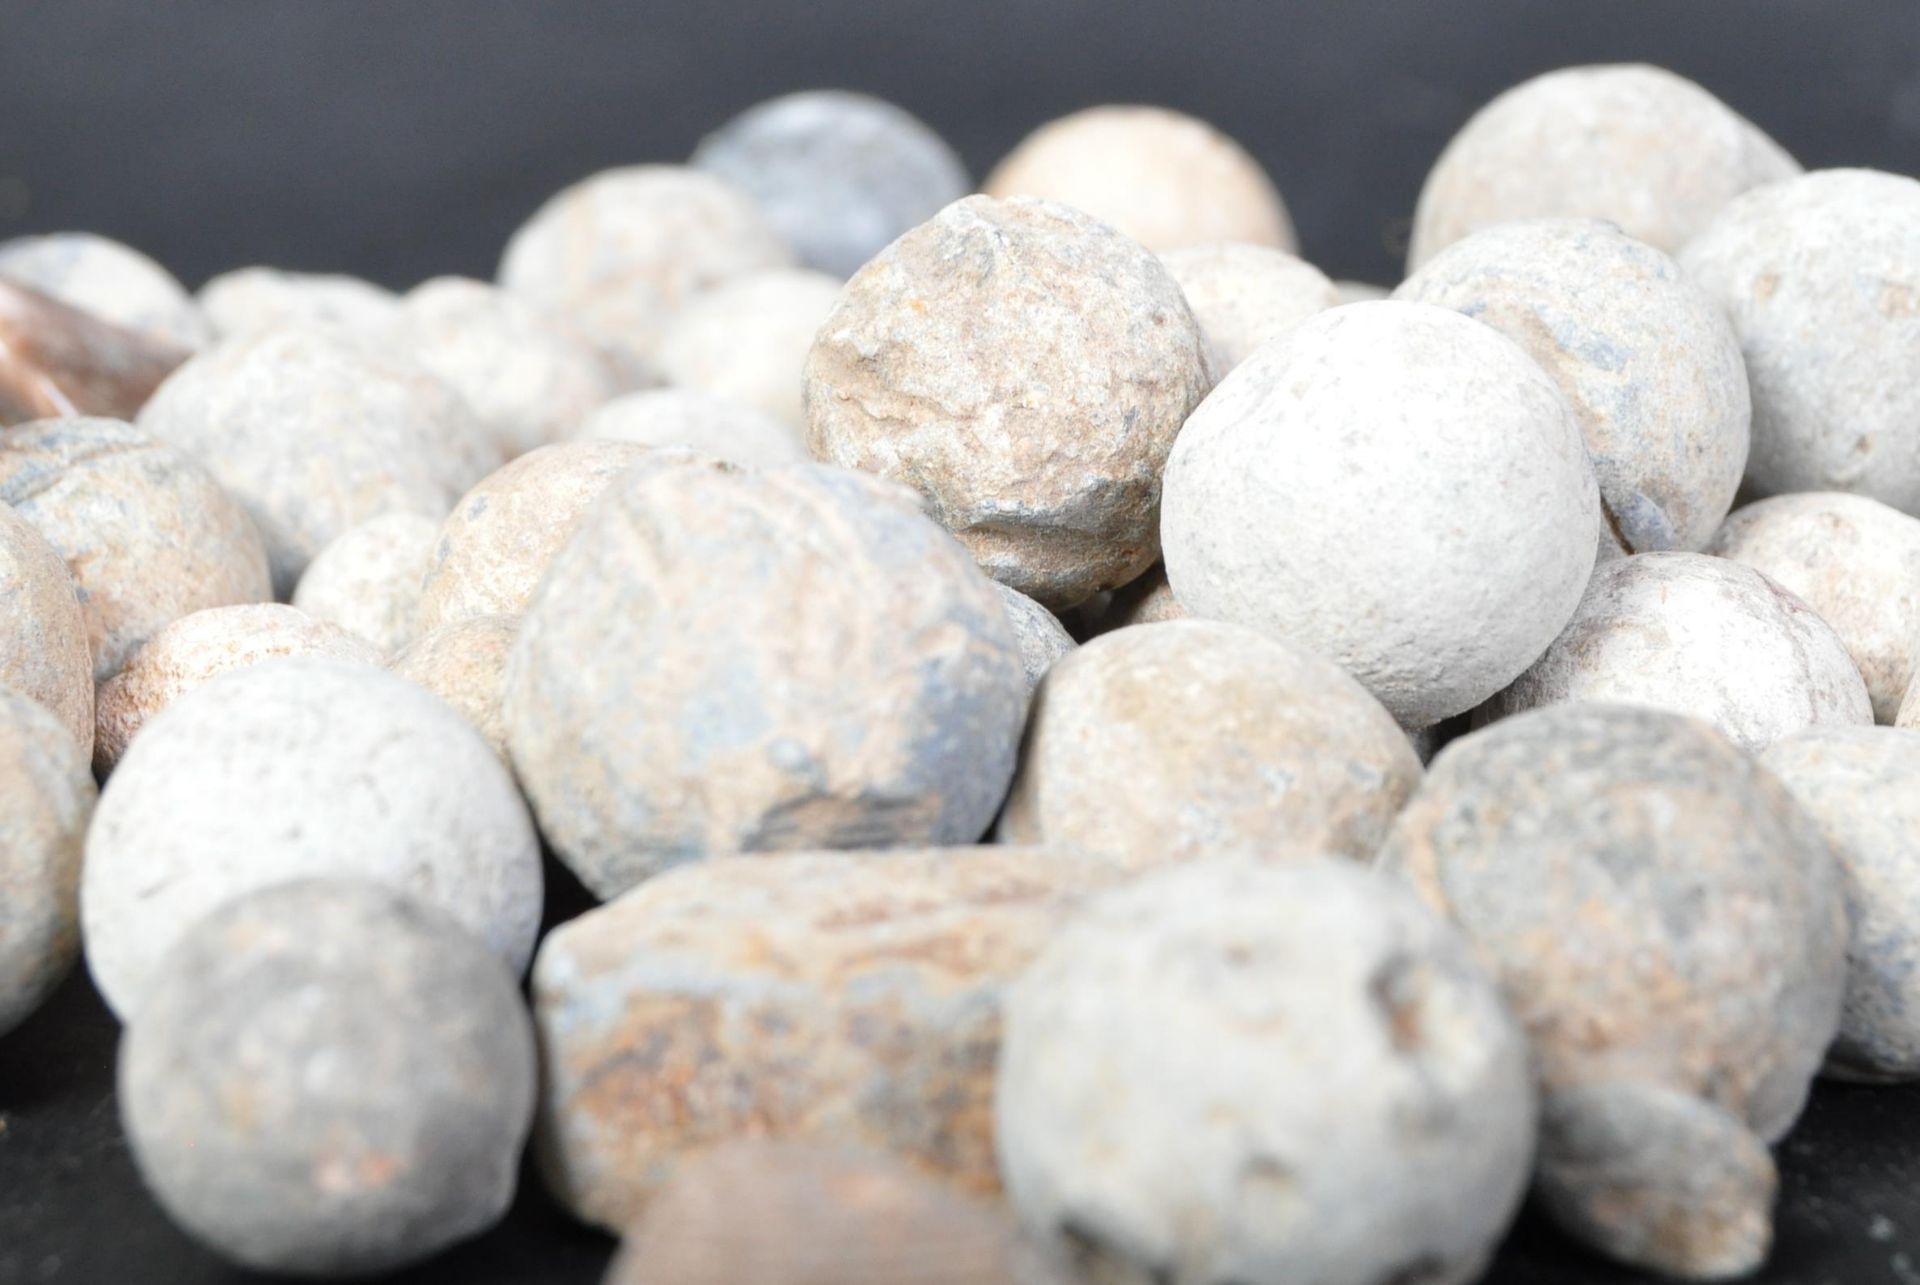 COLLECTION OF 1685 MUSKET BALLS (MONMOUTH REBELLION) - Image 3 of 3